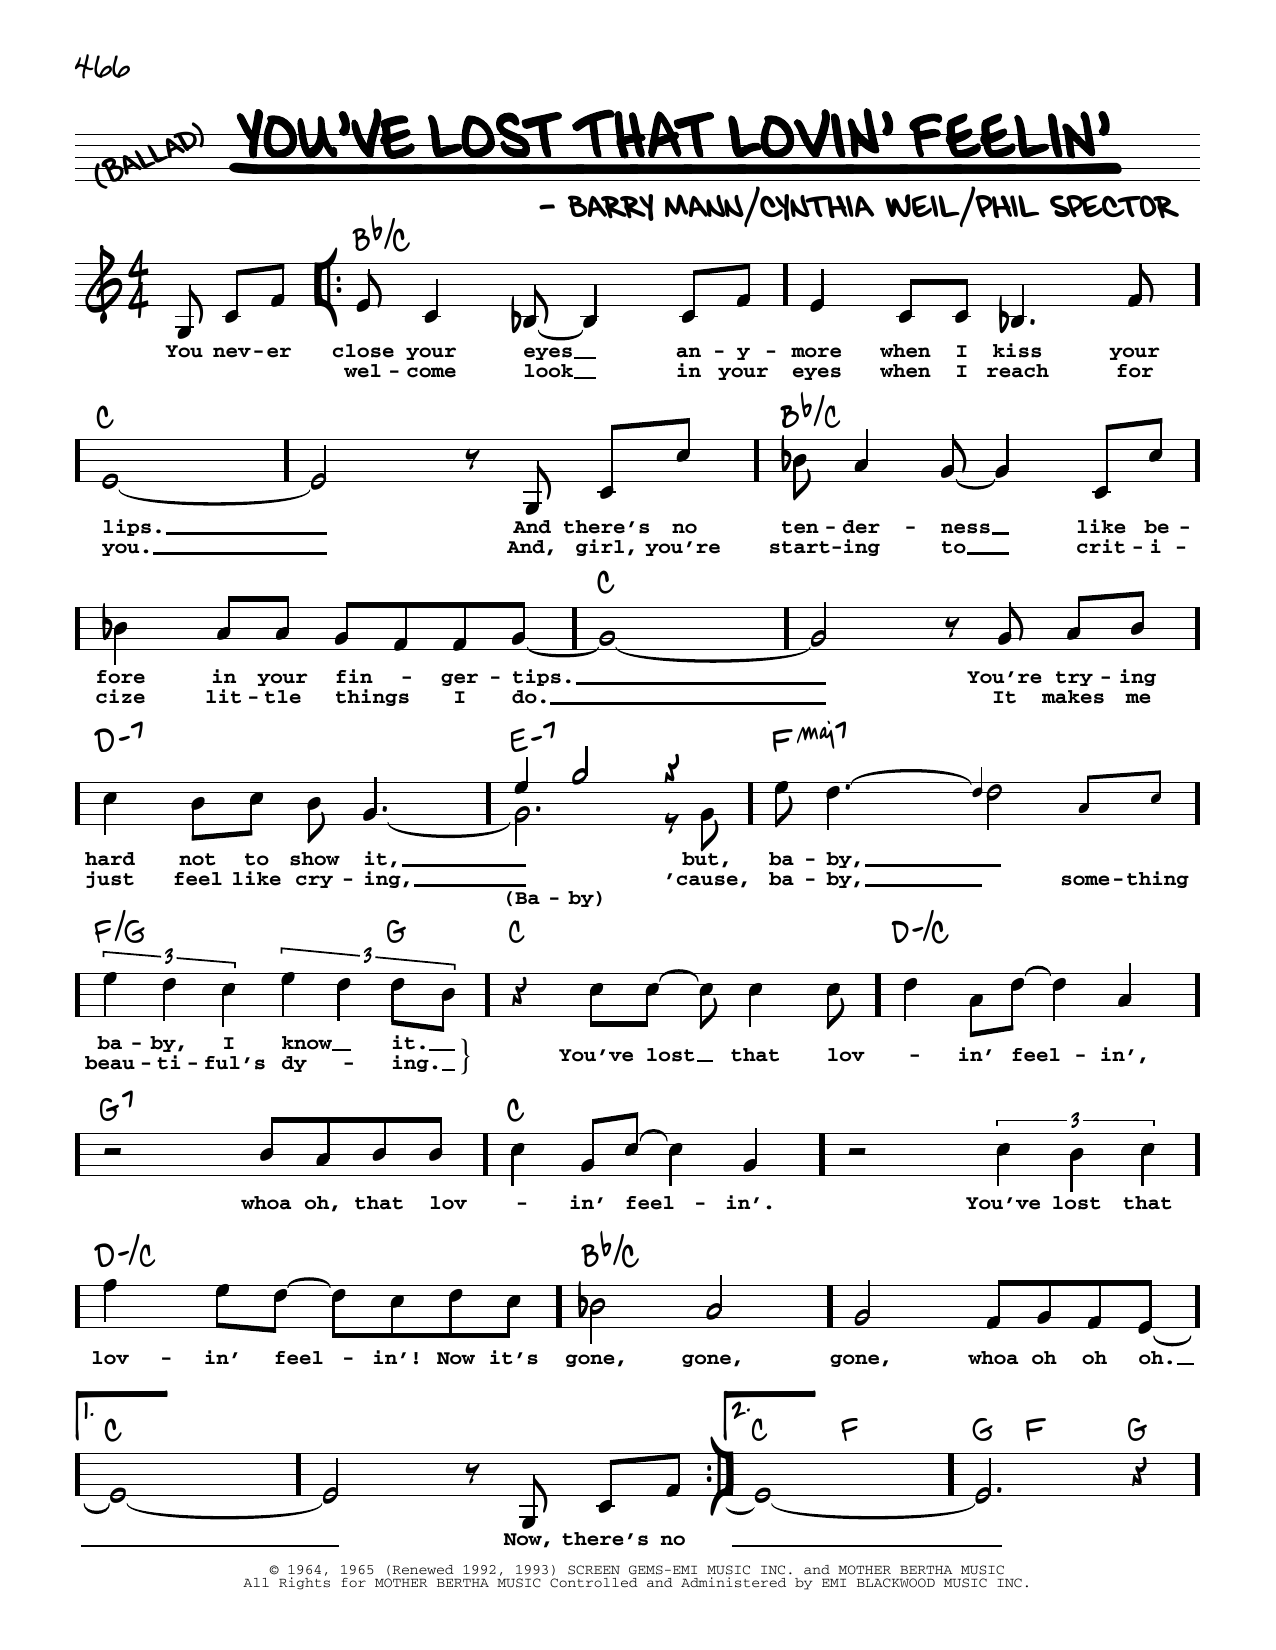 Download The Righteous Brothers You've Lost That Lovin' Feelin' (High V Sheet Music